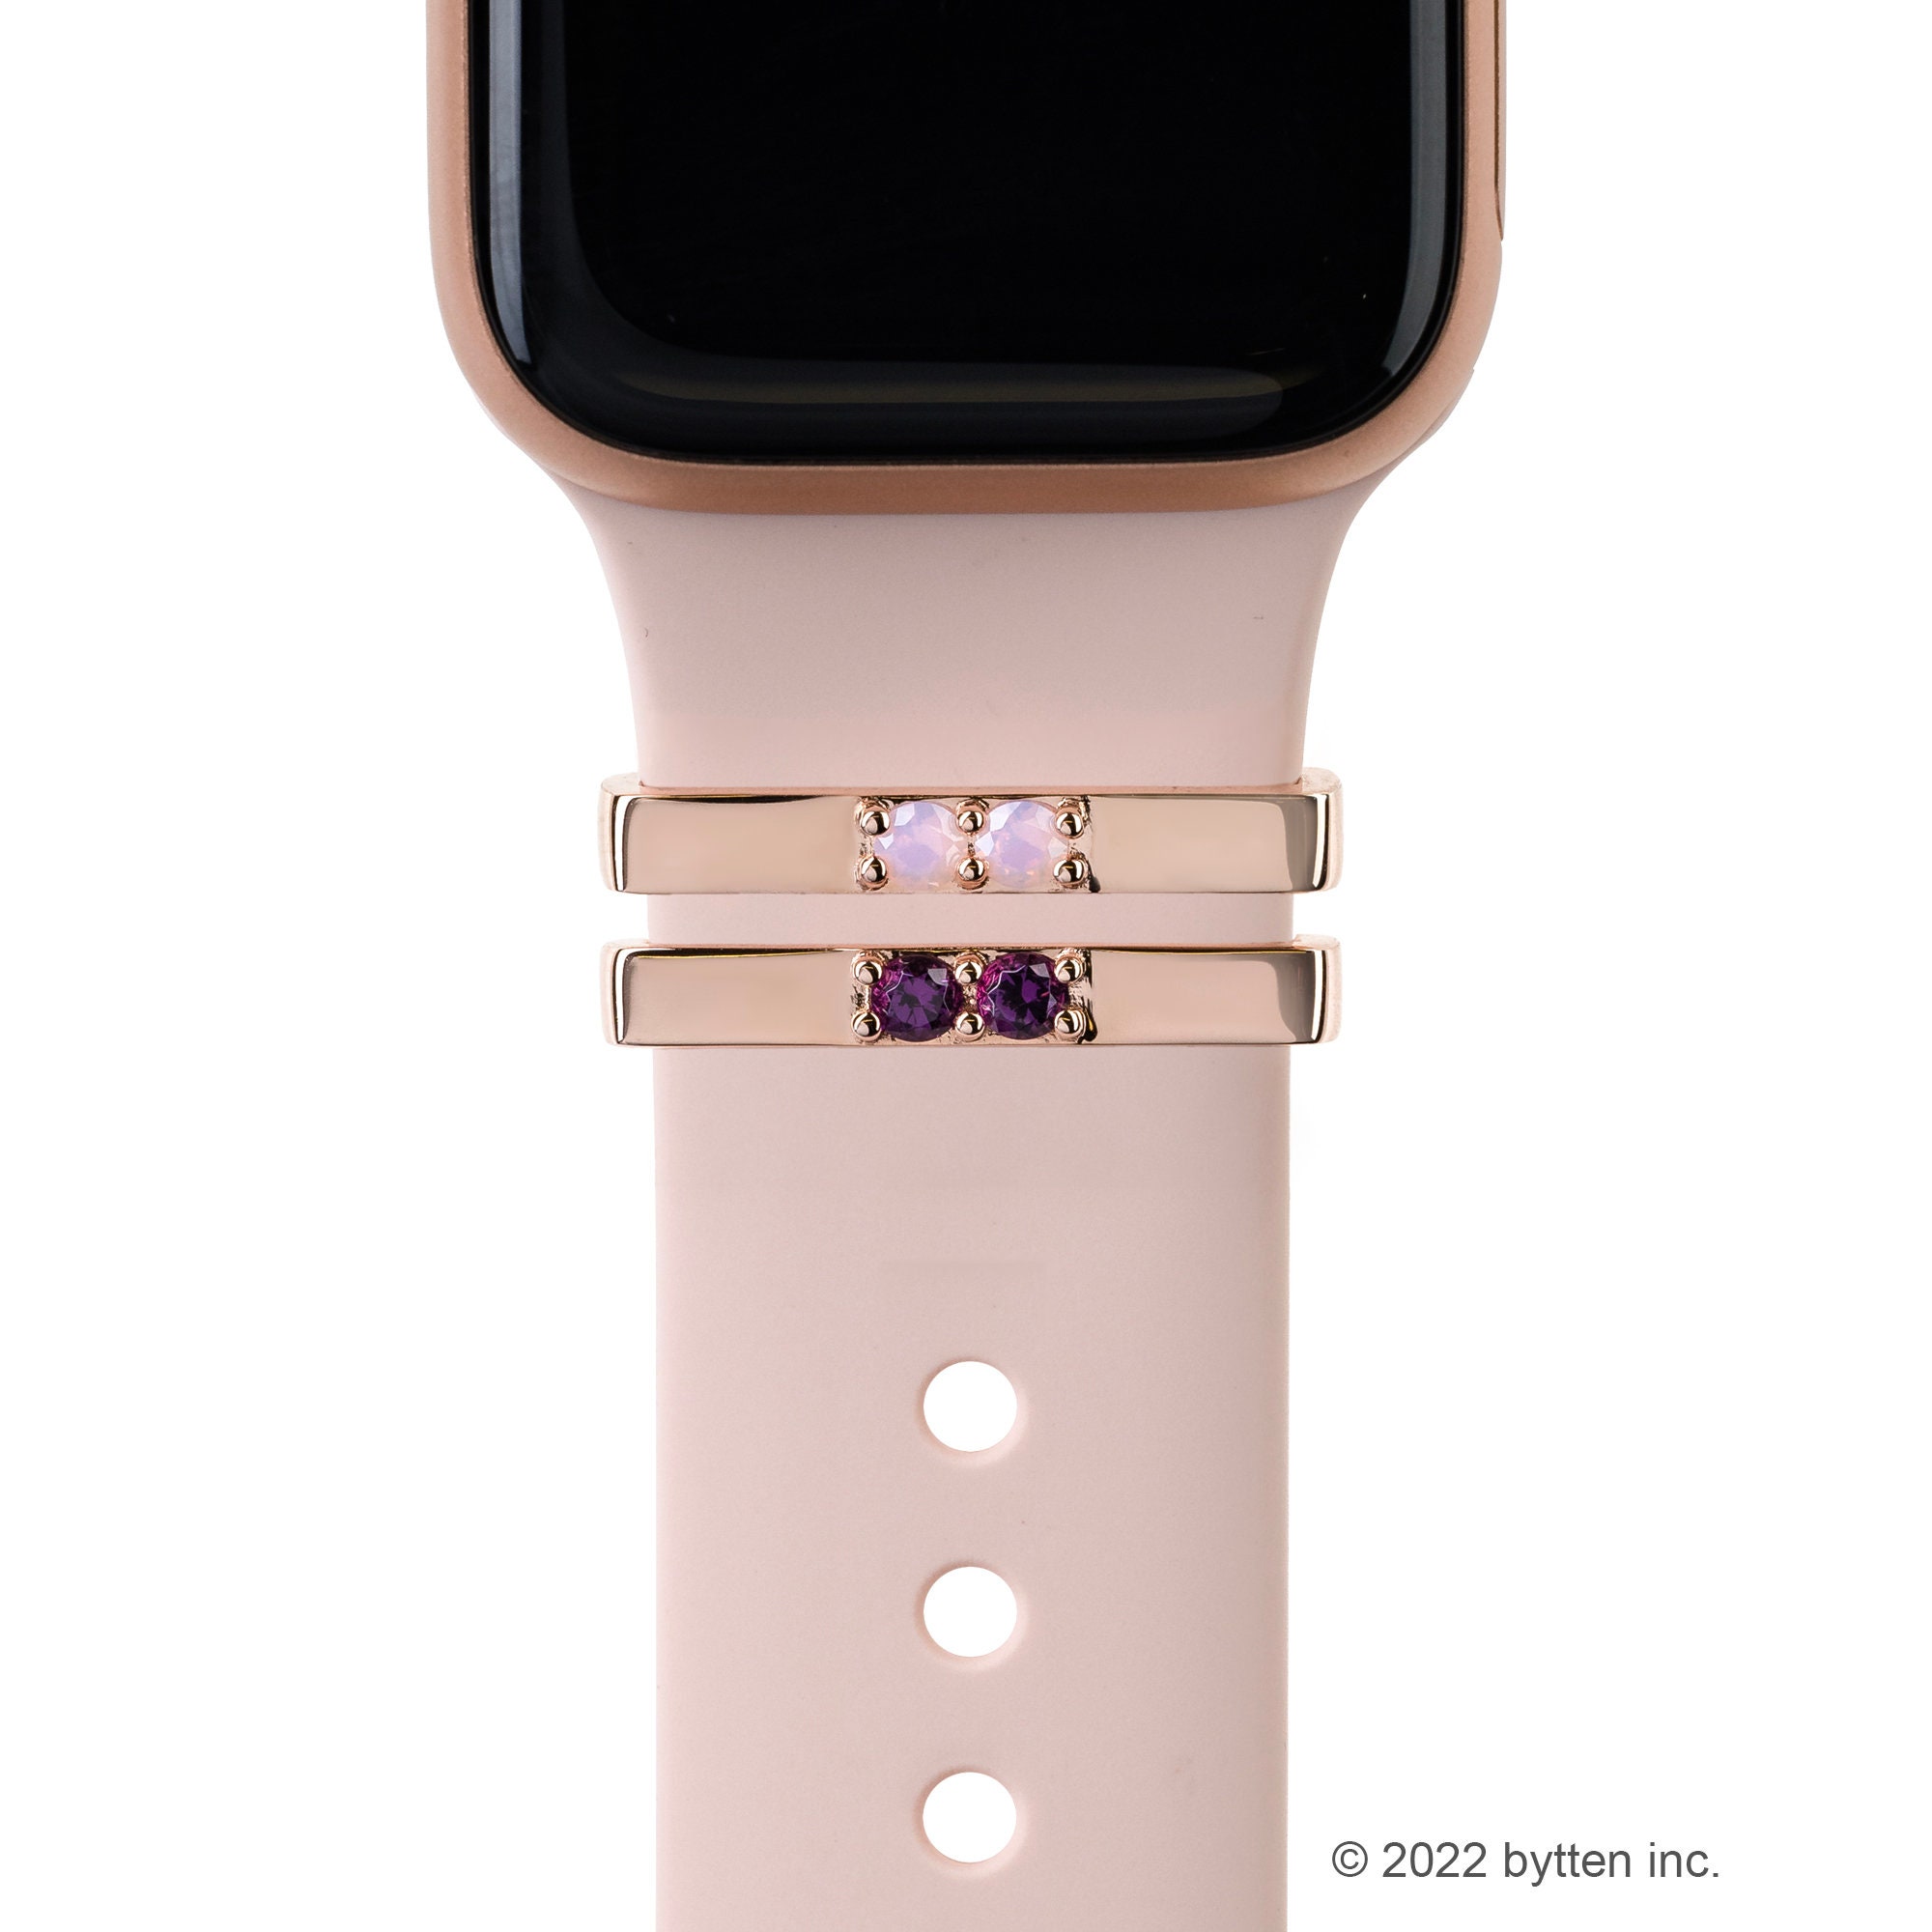 Apple Watch Band Extenders and Supplies The Fire Opal Extender Clasp